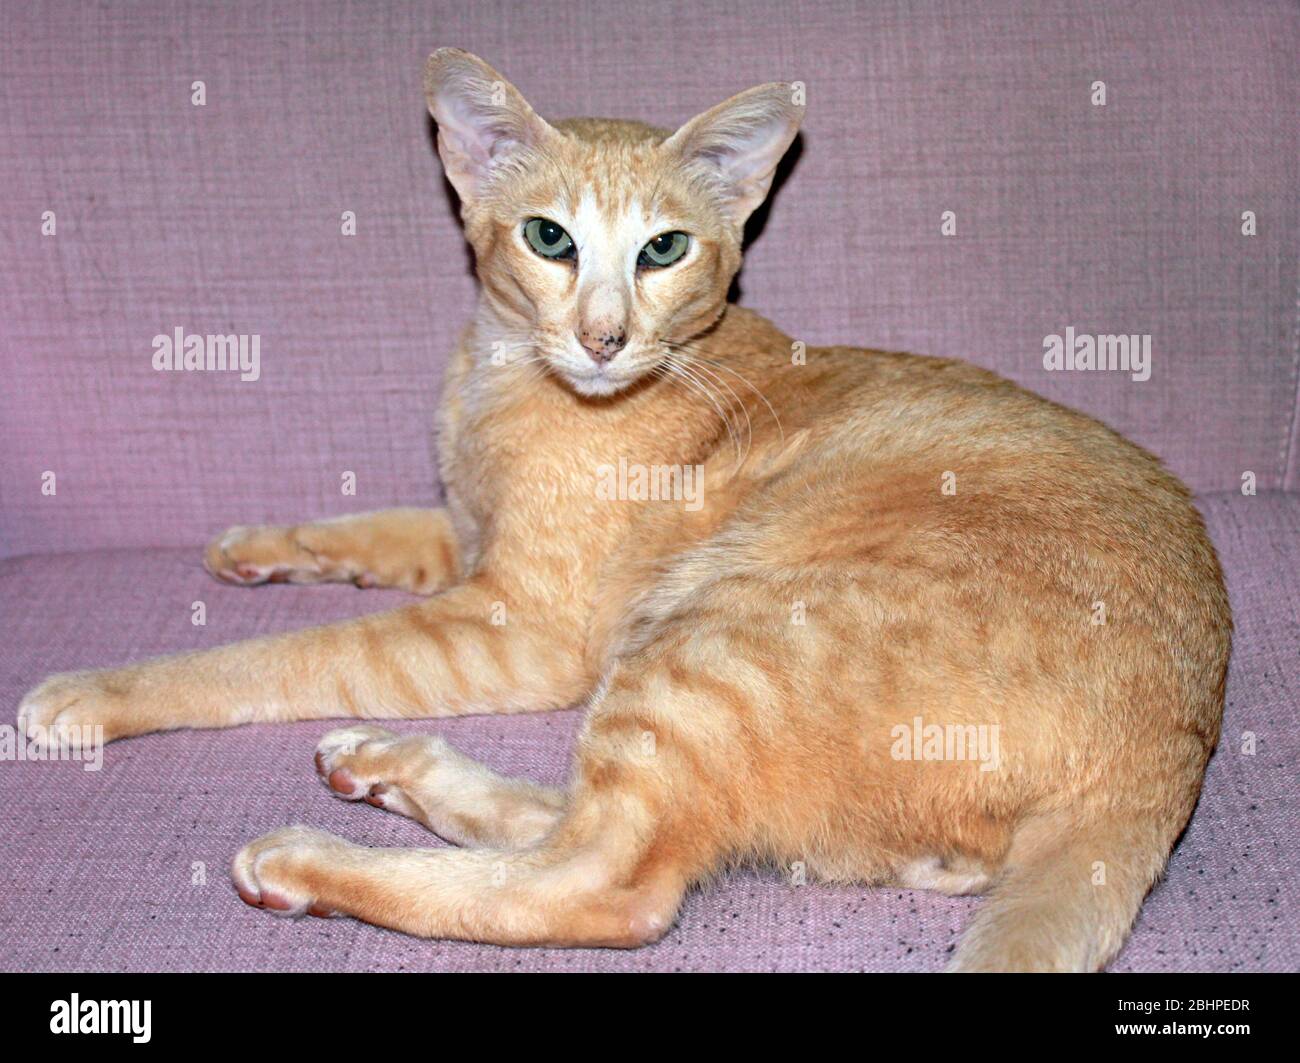 Red-spotted tabby oriental or Siamese cat Stock Photo